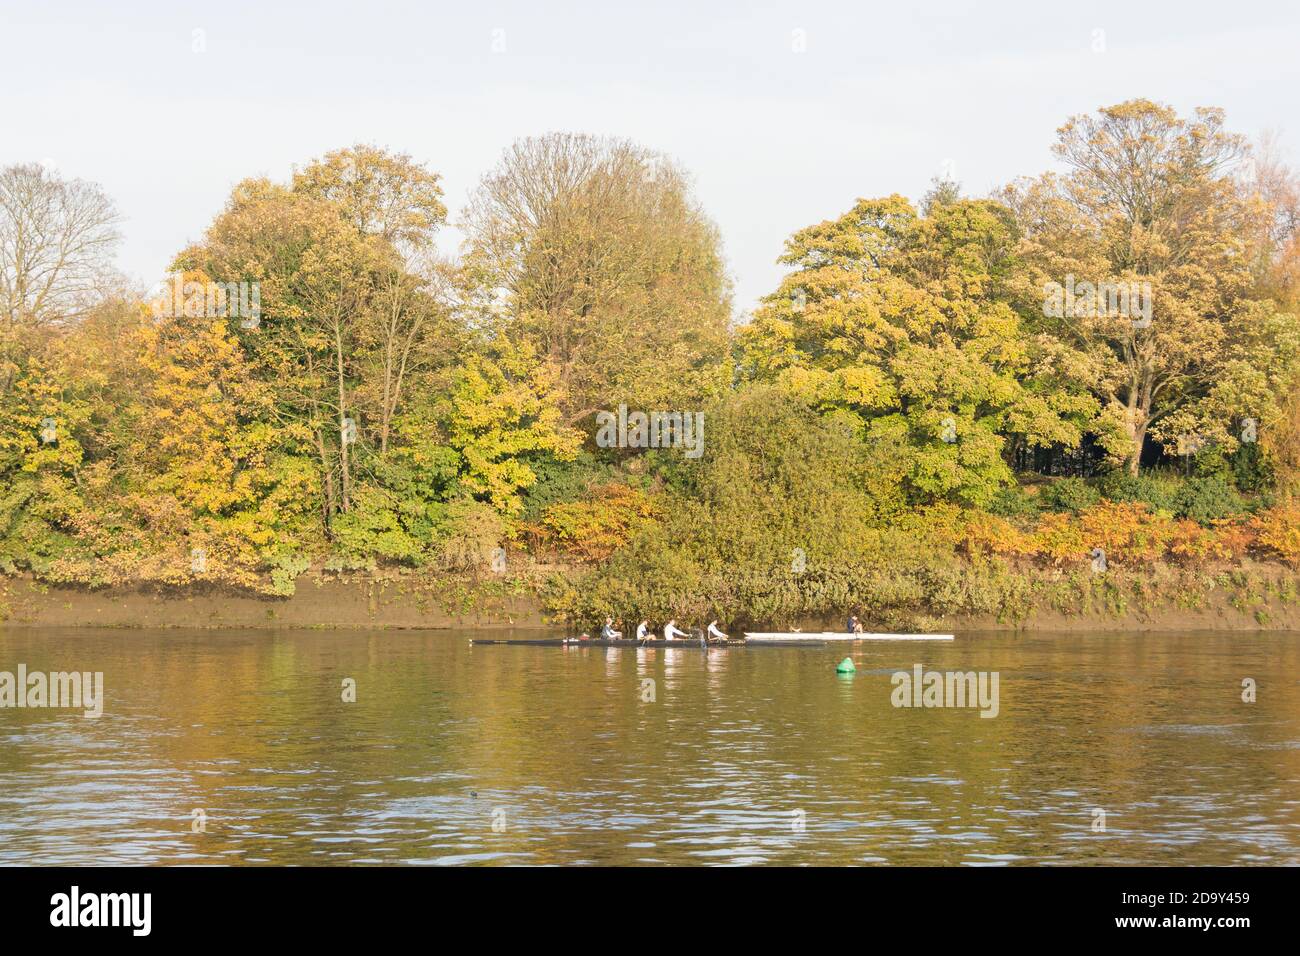 A men's coxed four on the River Thames in Mortlake, southwest London, UK Stock Photo